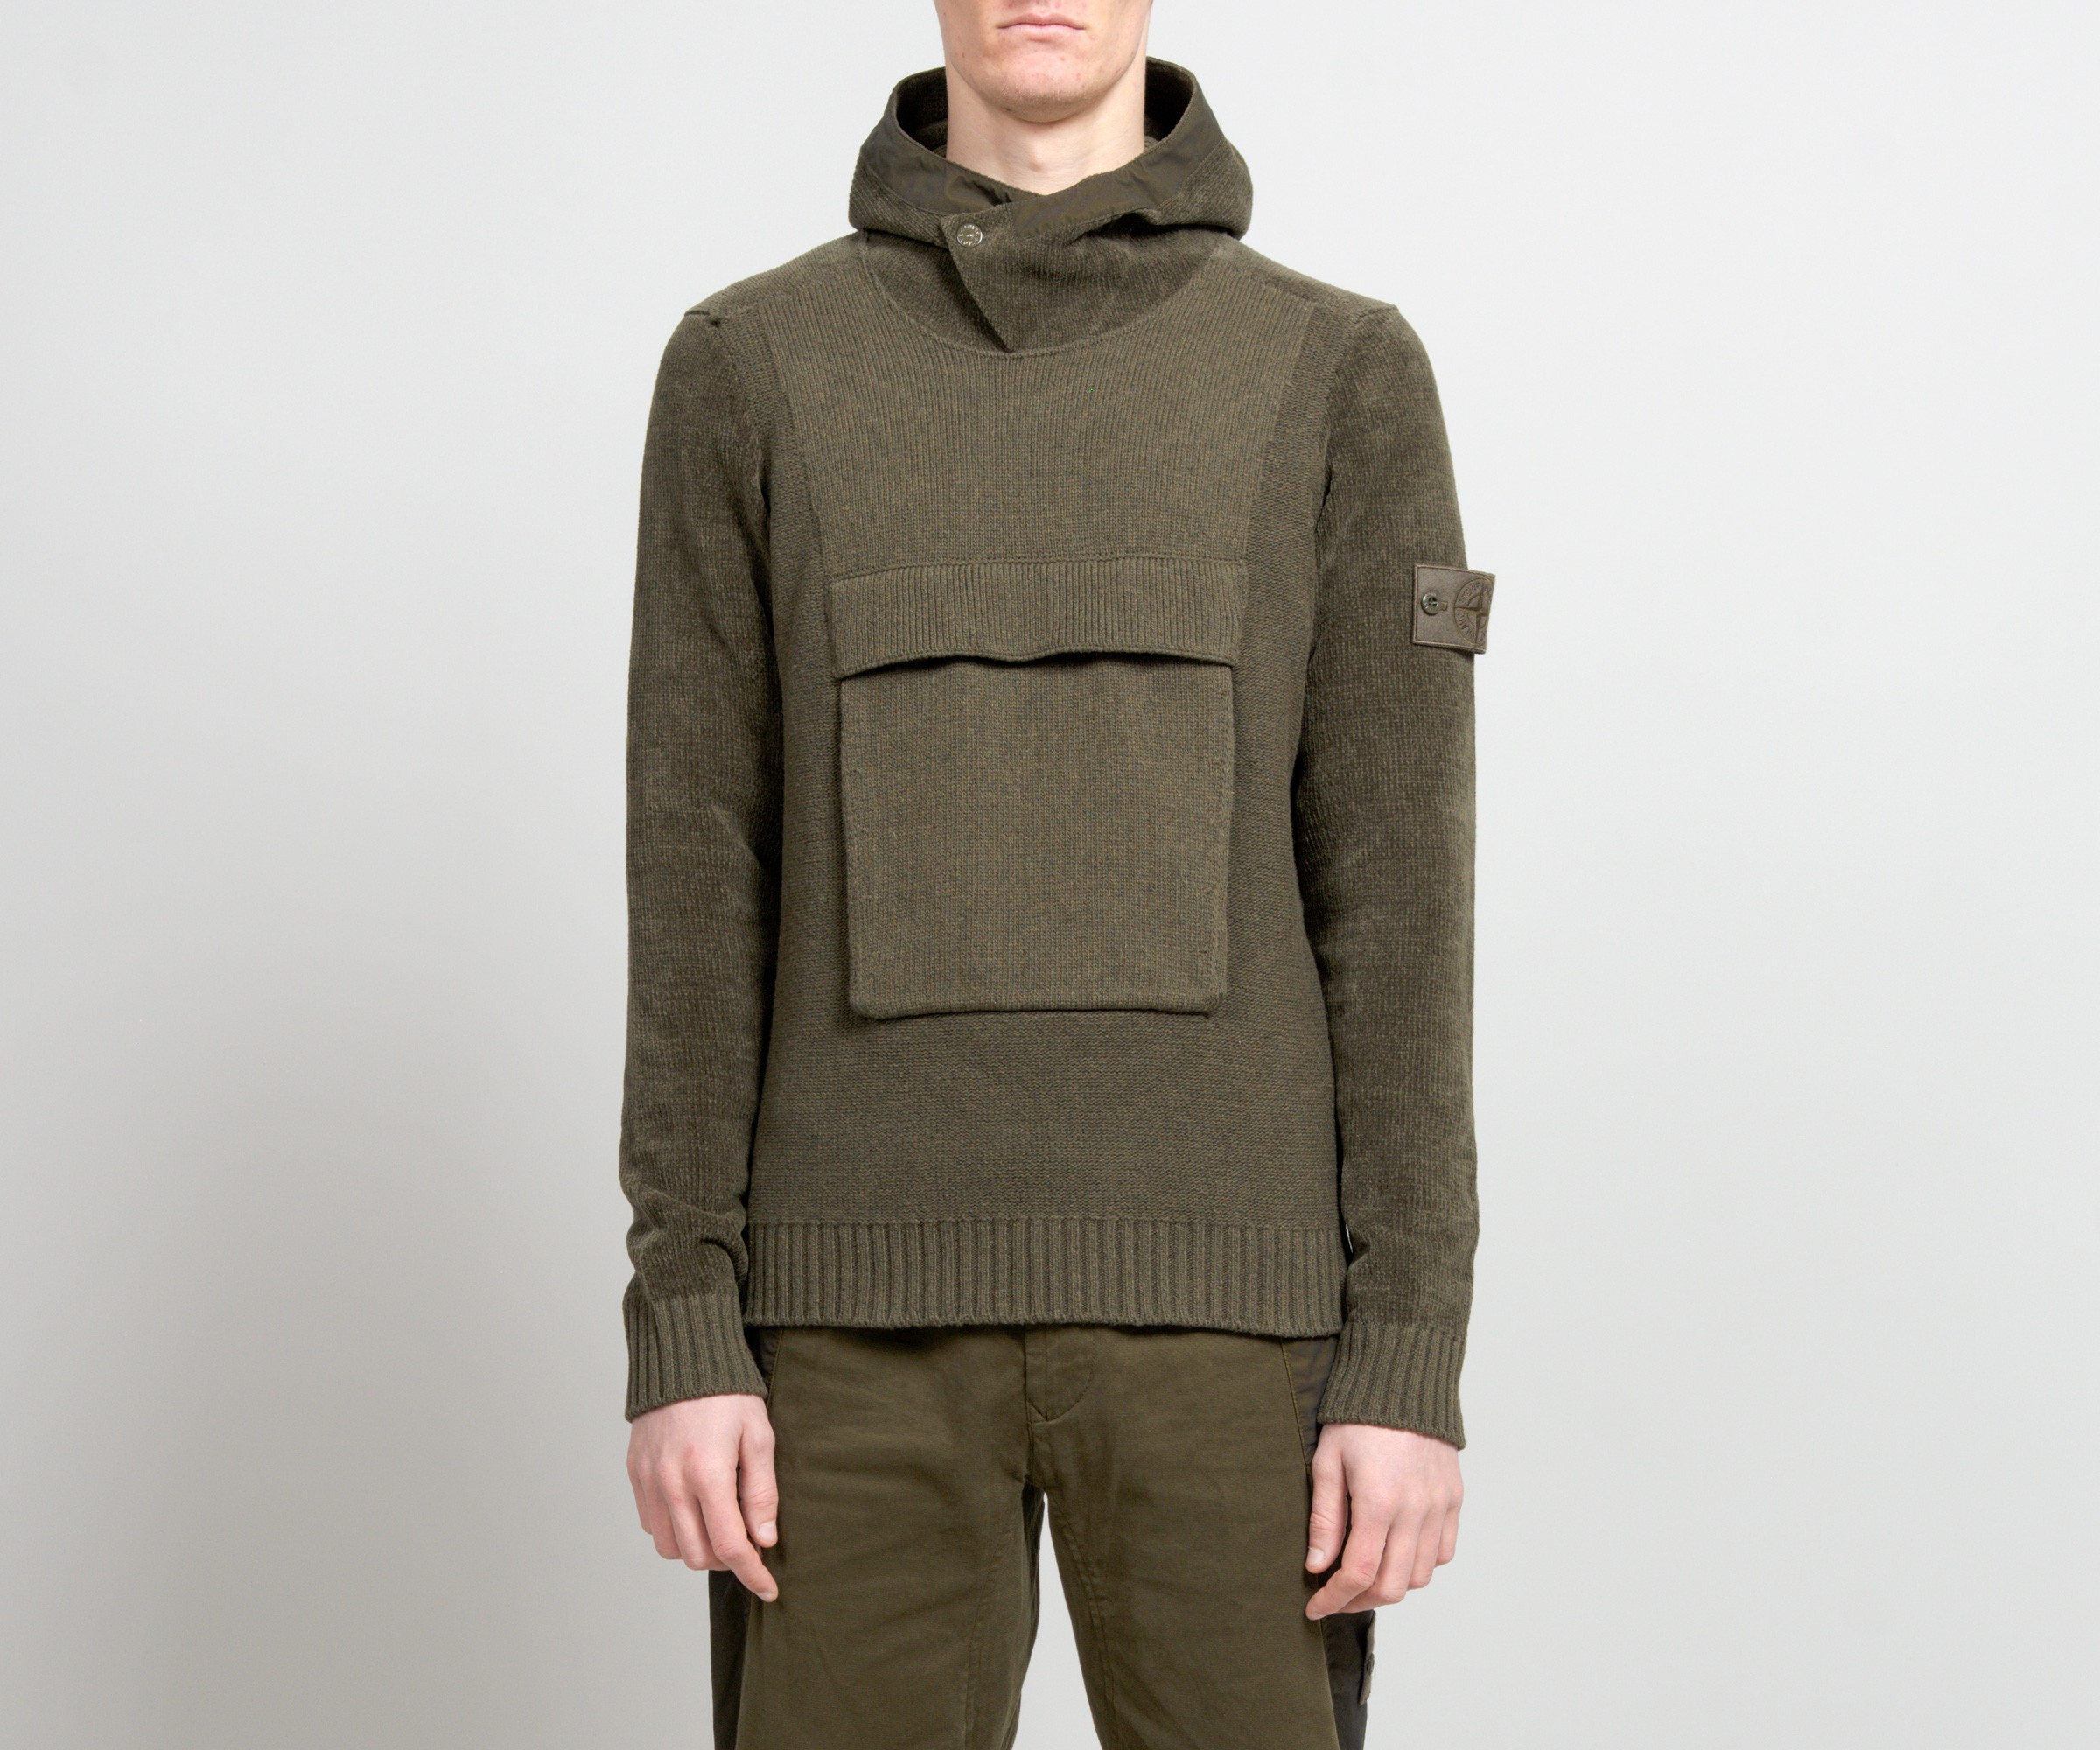 Stone Island 'Ghost Chenille' Lambswool Mixed Yarn Knit Olive